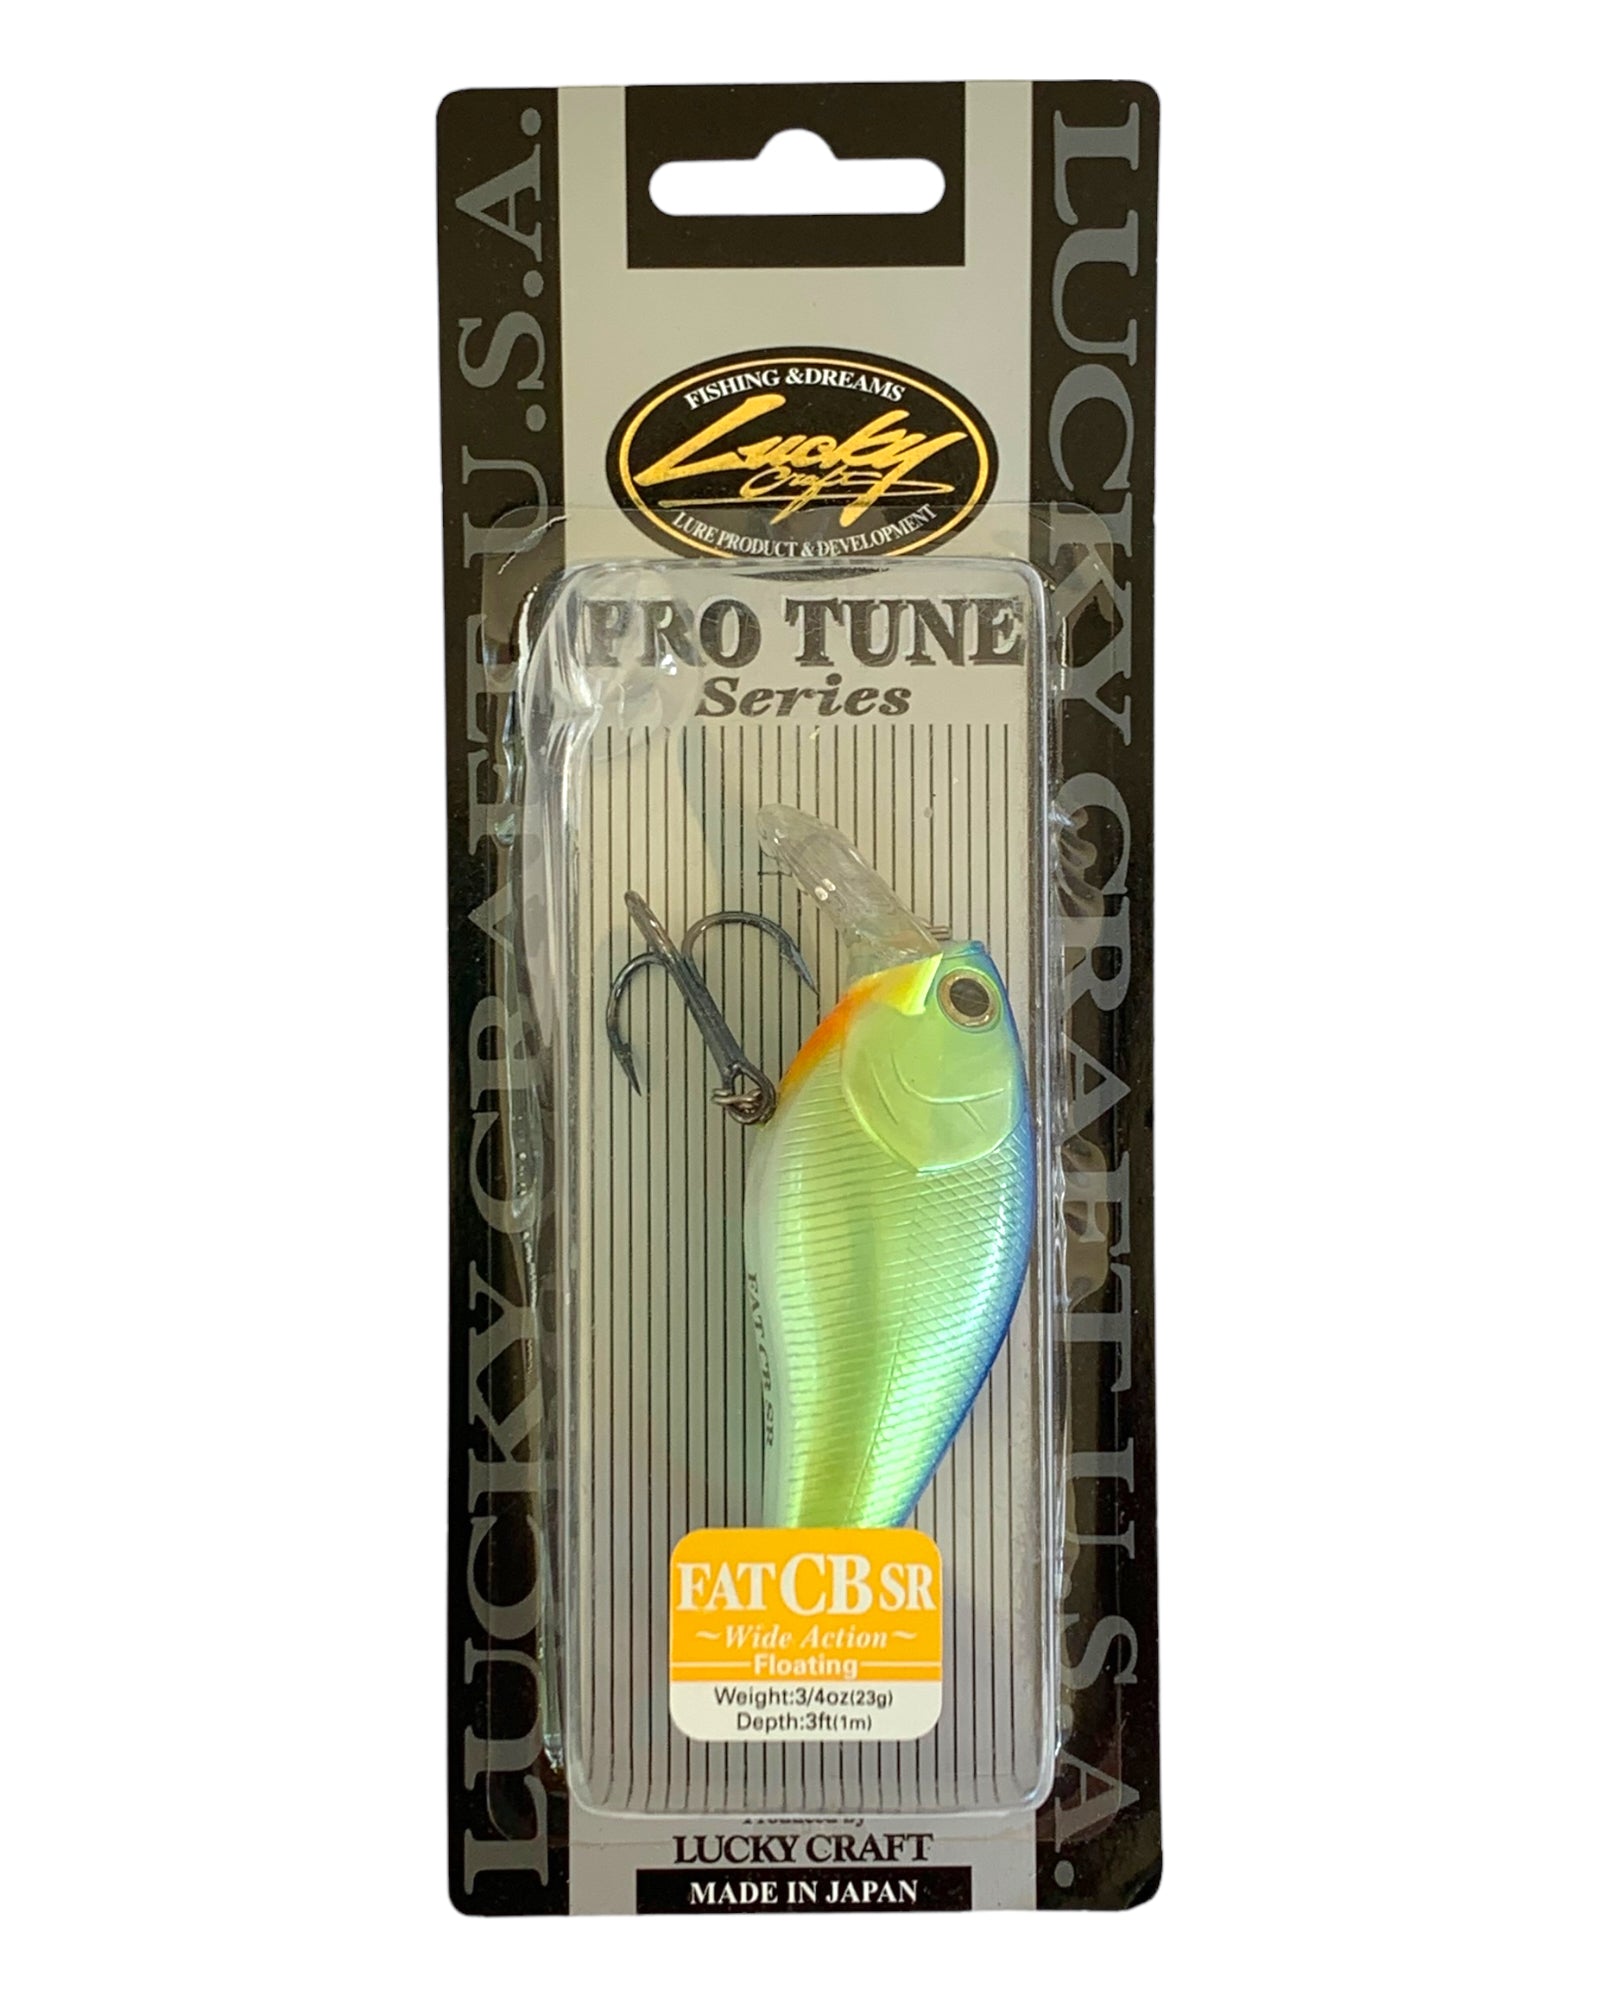 LUCKY CRAFT FAT CB SR Fishing Crankbait in Chartreuse Blue – Toad